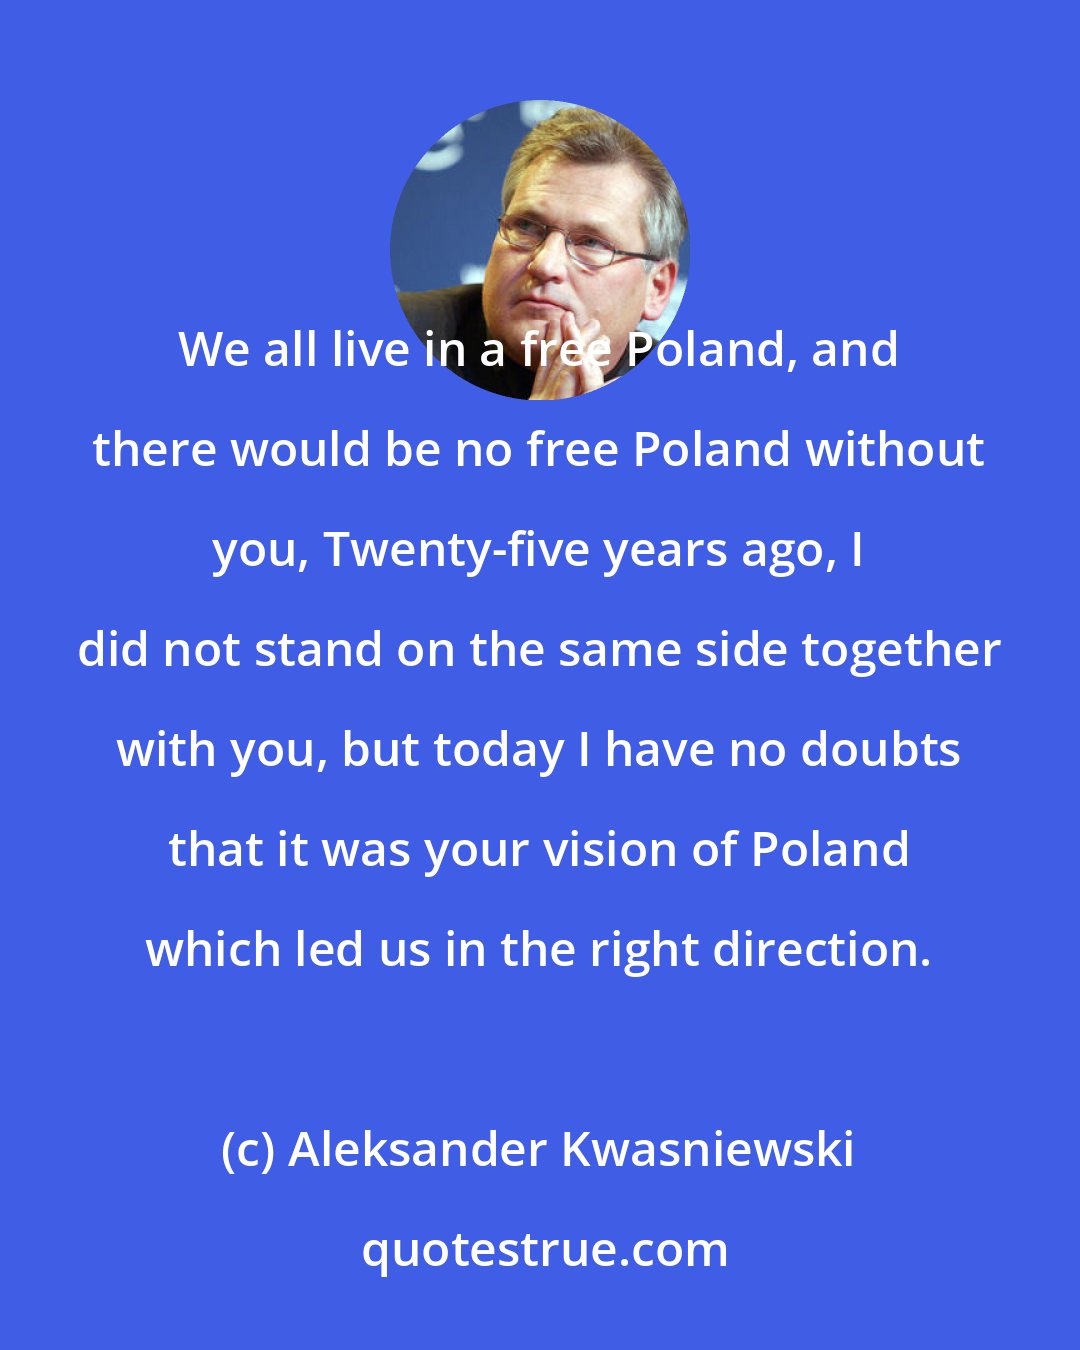 Aleksander Kwasniewski: We all live in a free Poland, and there would be no free Poland without you, Twenty-five years ago, I did not stand on the same side together with you, but today I have no doubts that it was your vision of Poland which led us in the right direction.